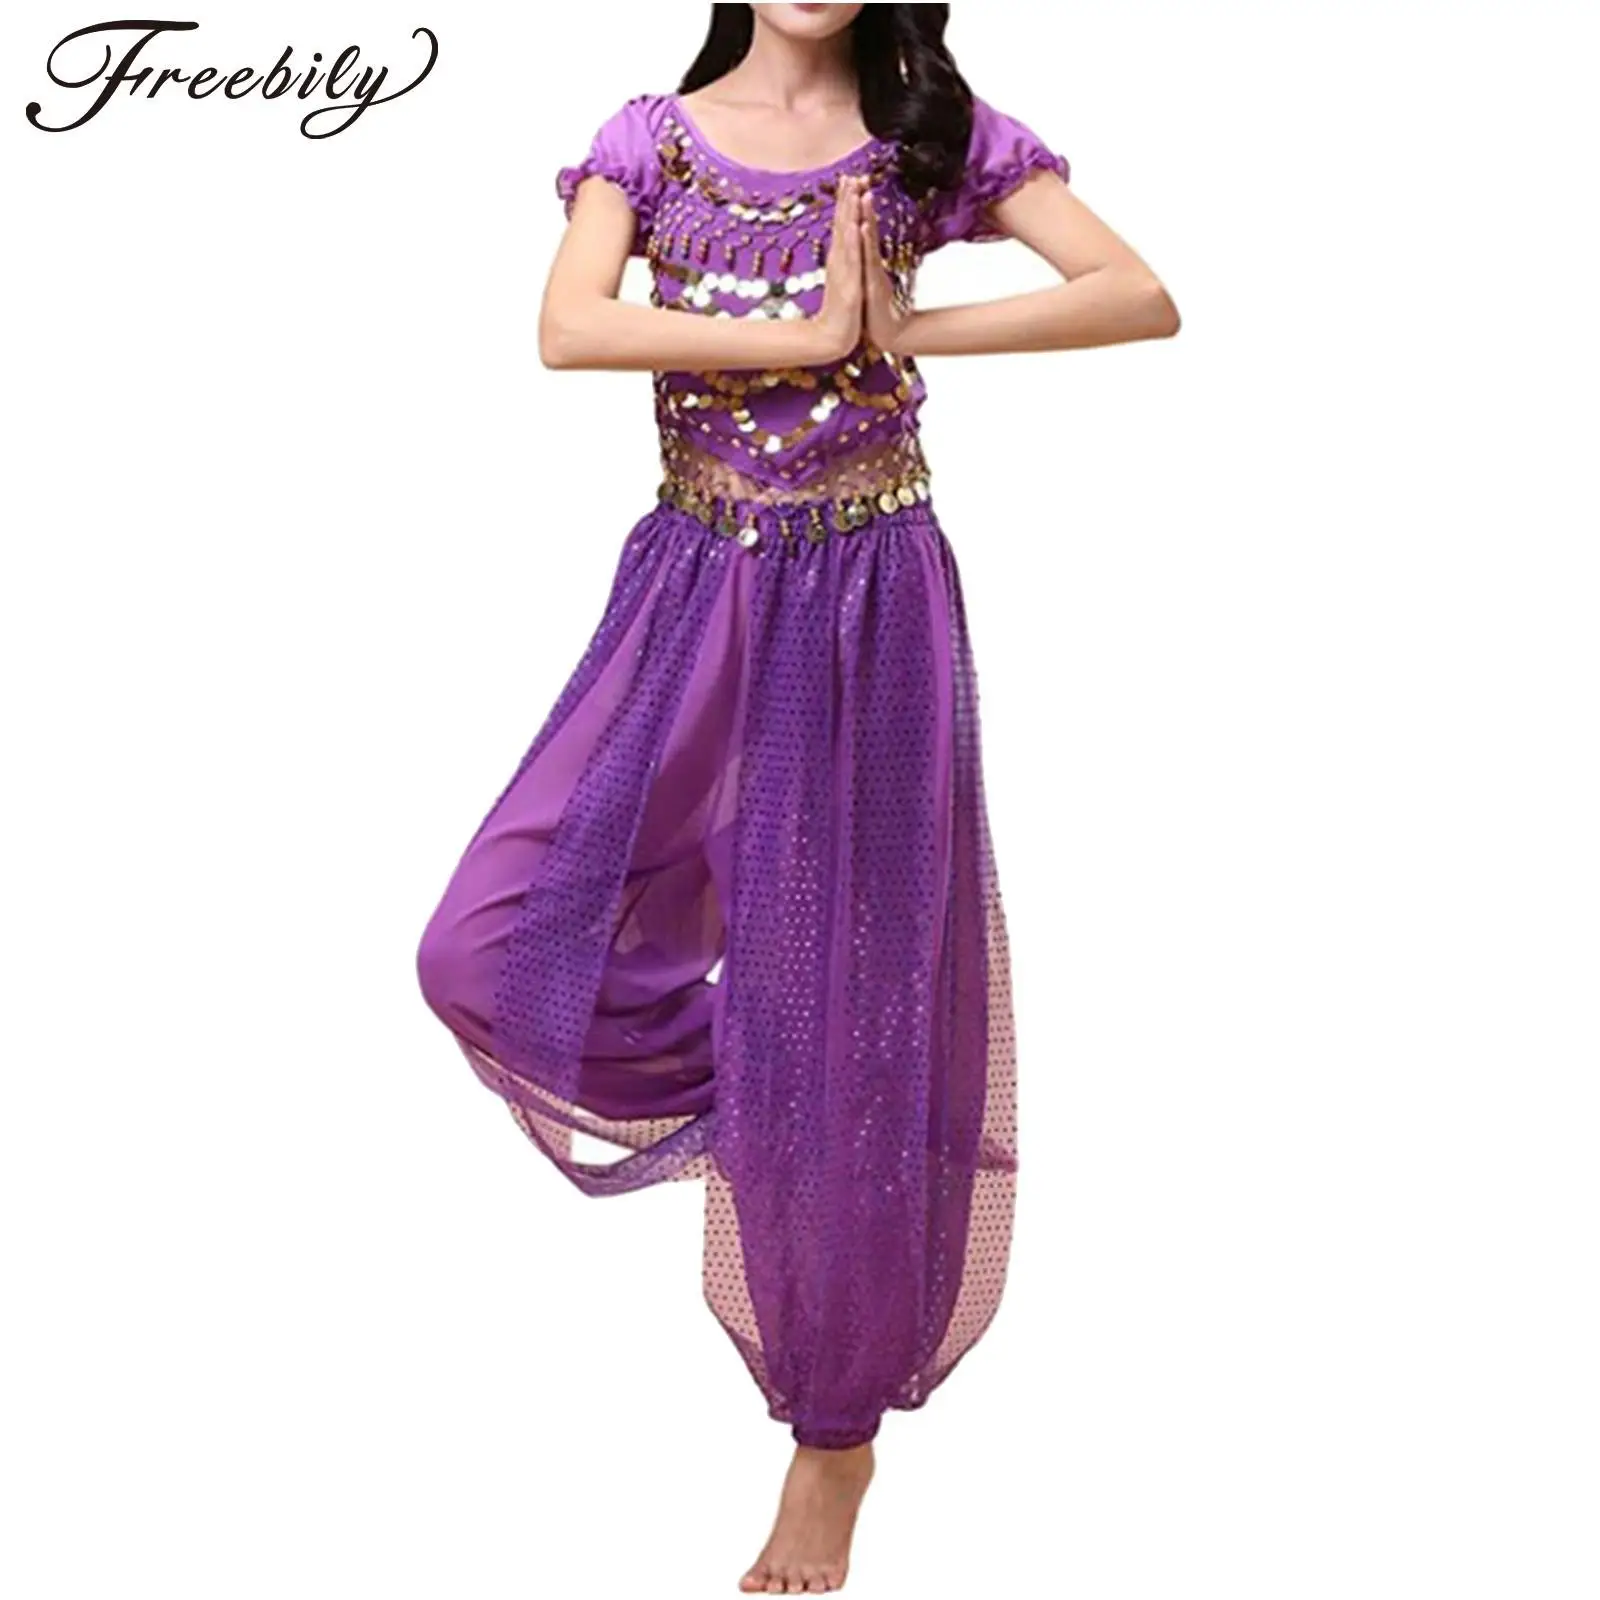 

Women Bollywood Belly Dance Costume Sparkly Crop Top and Harem Pants Performance Egyptian India Arabian Dance Costumes